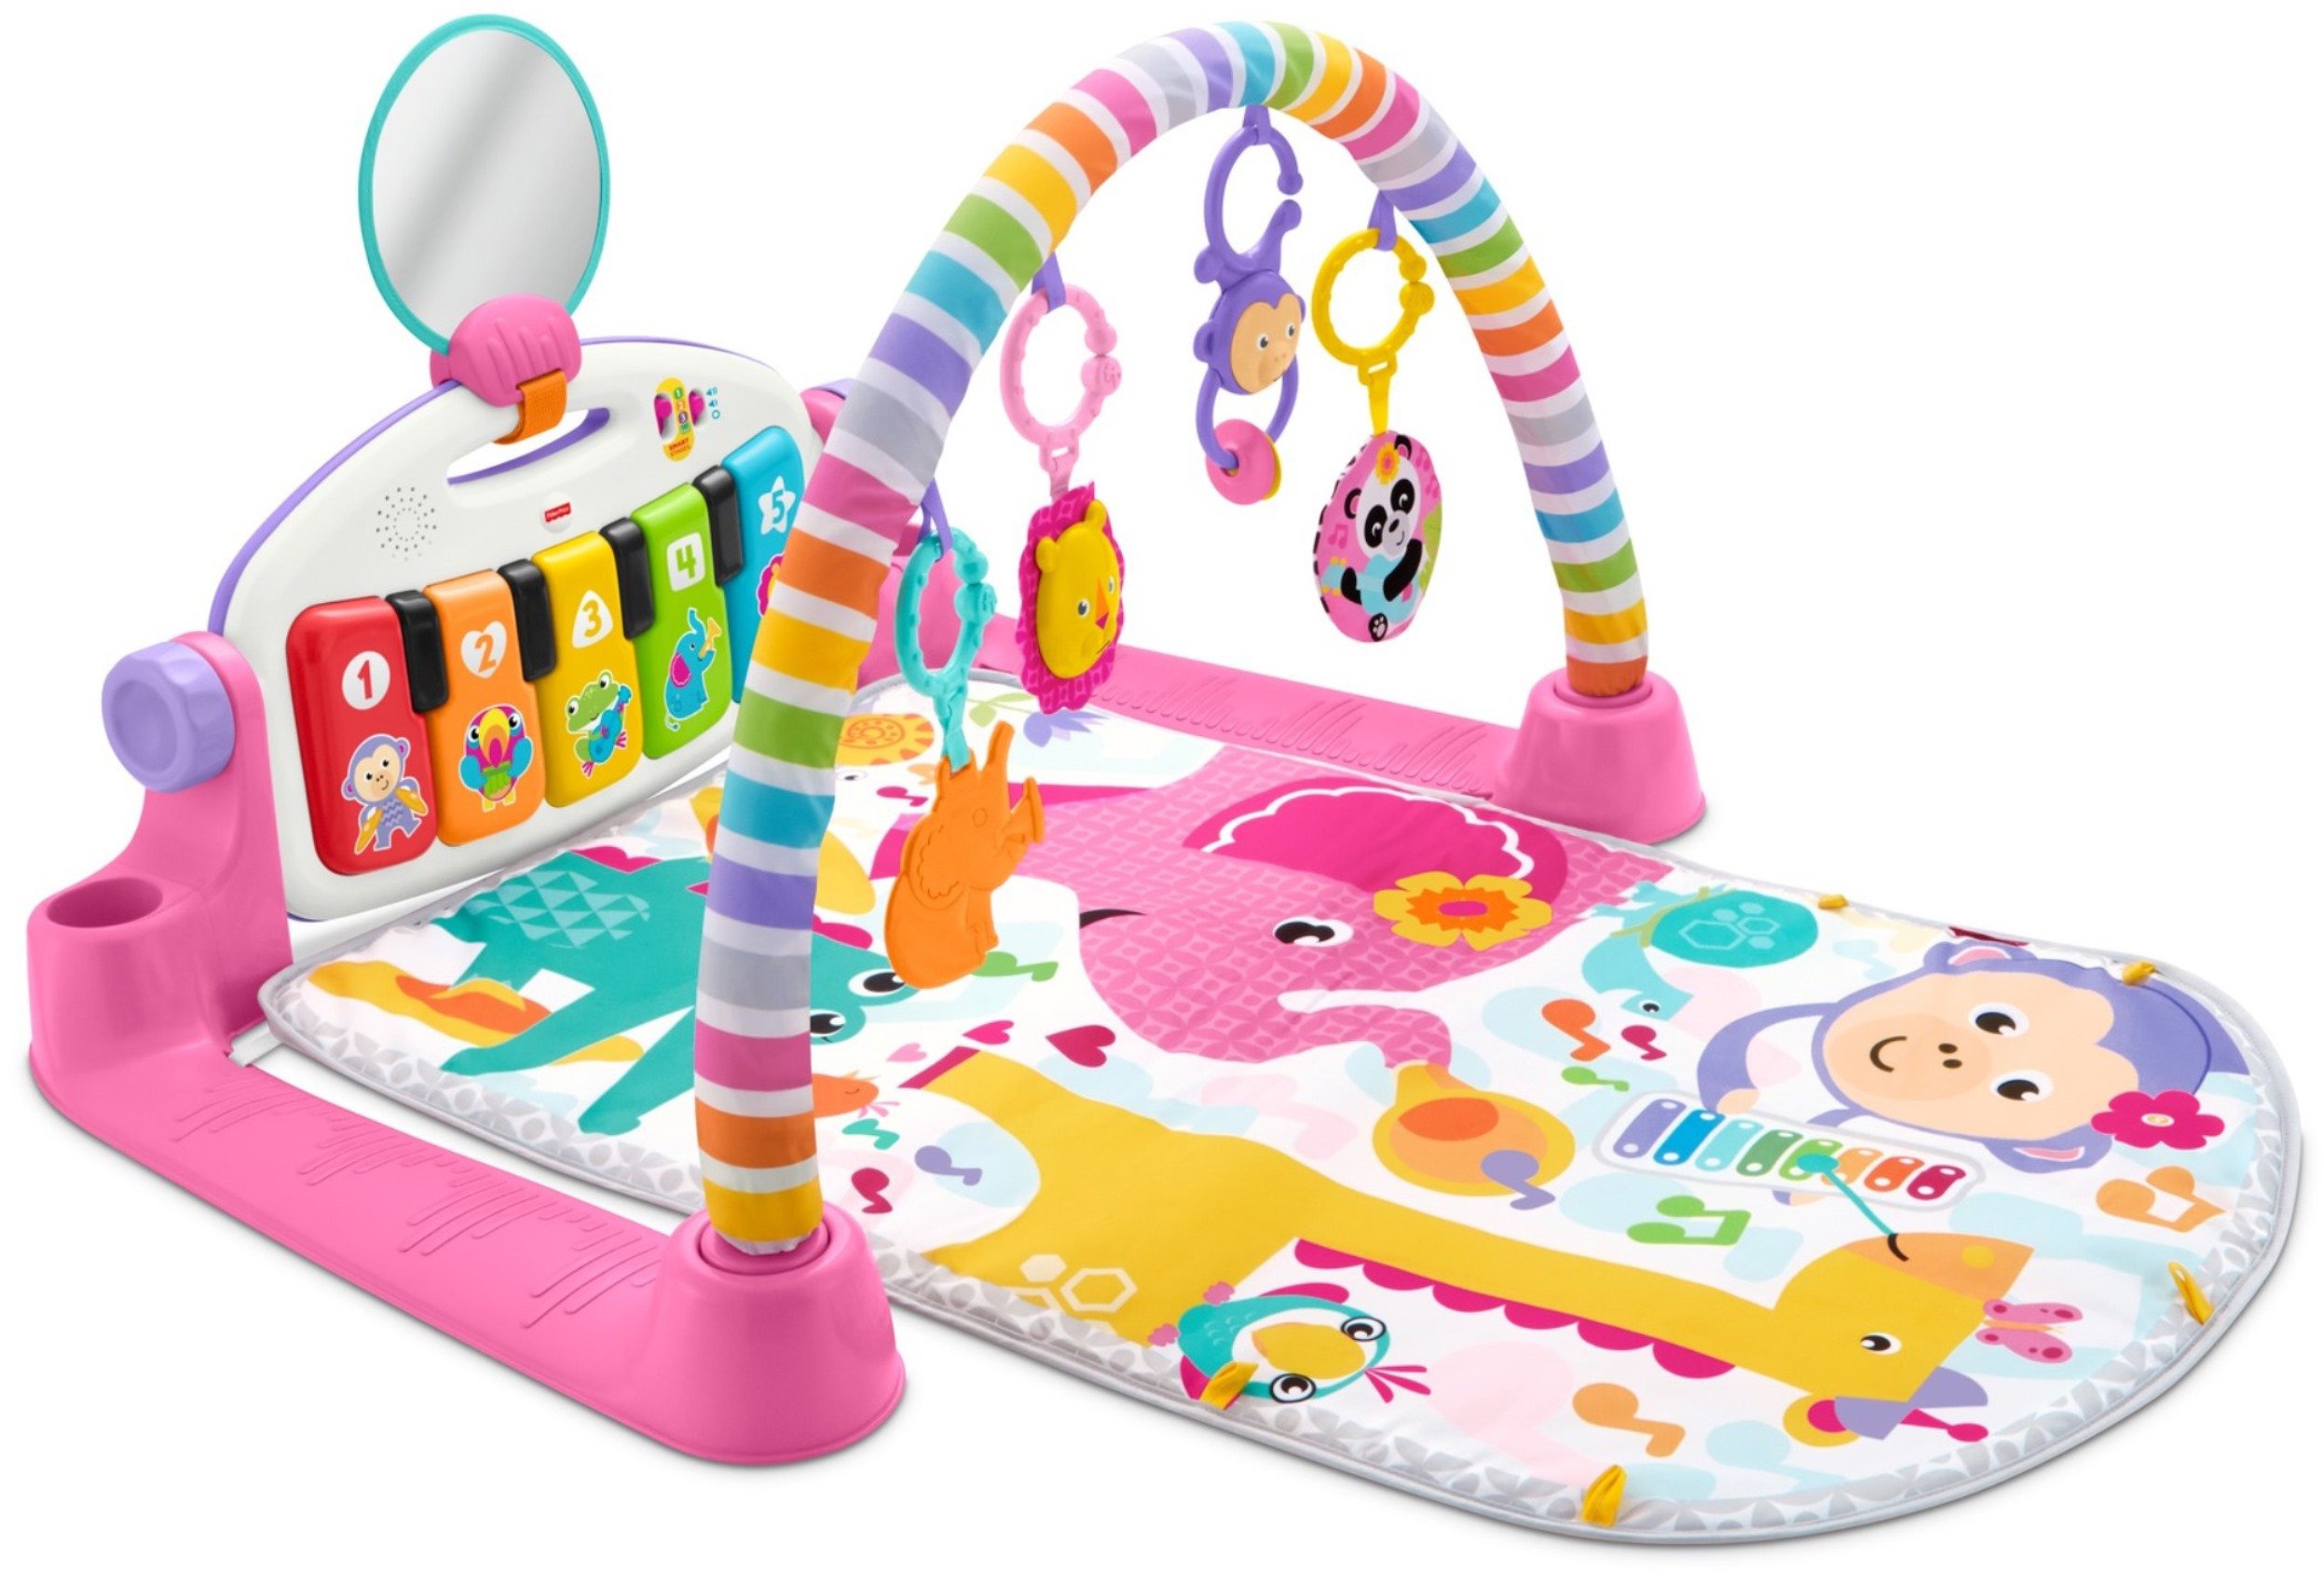 Fisher-Price Baby Playmat Deluxe Kick & Play Piano Gym With Musical -Toy Lights & Smart Stages Learning Content For Newborn To Toddler, Pink